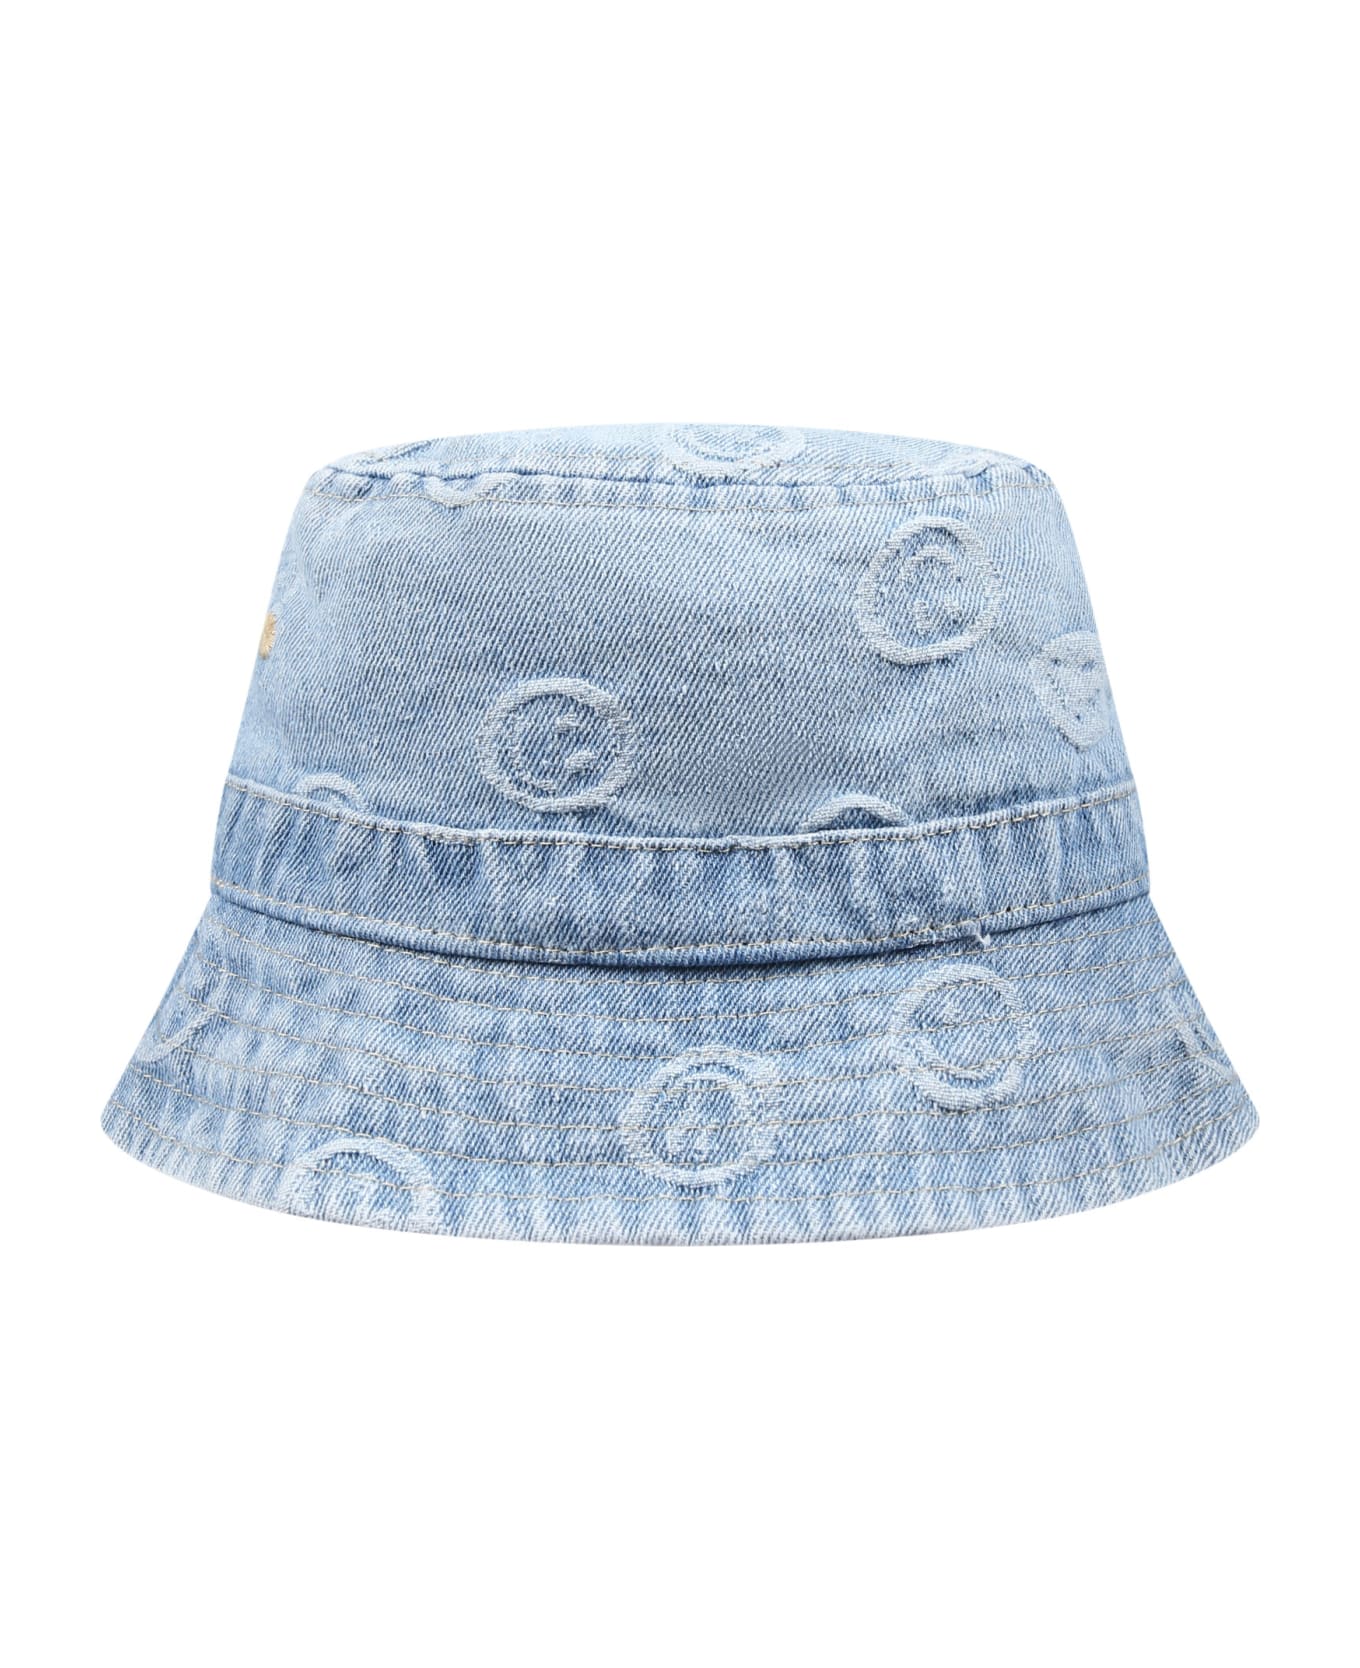 Molo Denim Sky Blue Cloche For Kids With Smile - Denim アクセサリー＆ギフト